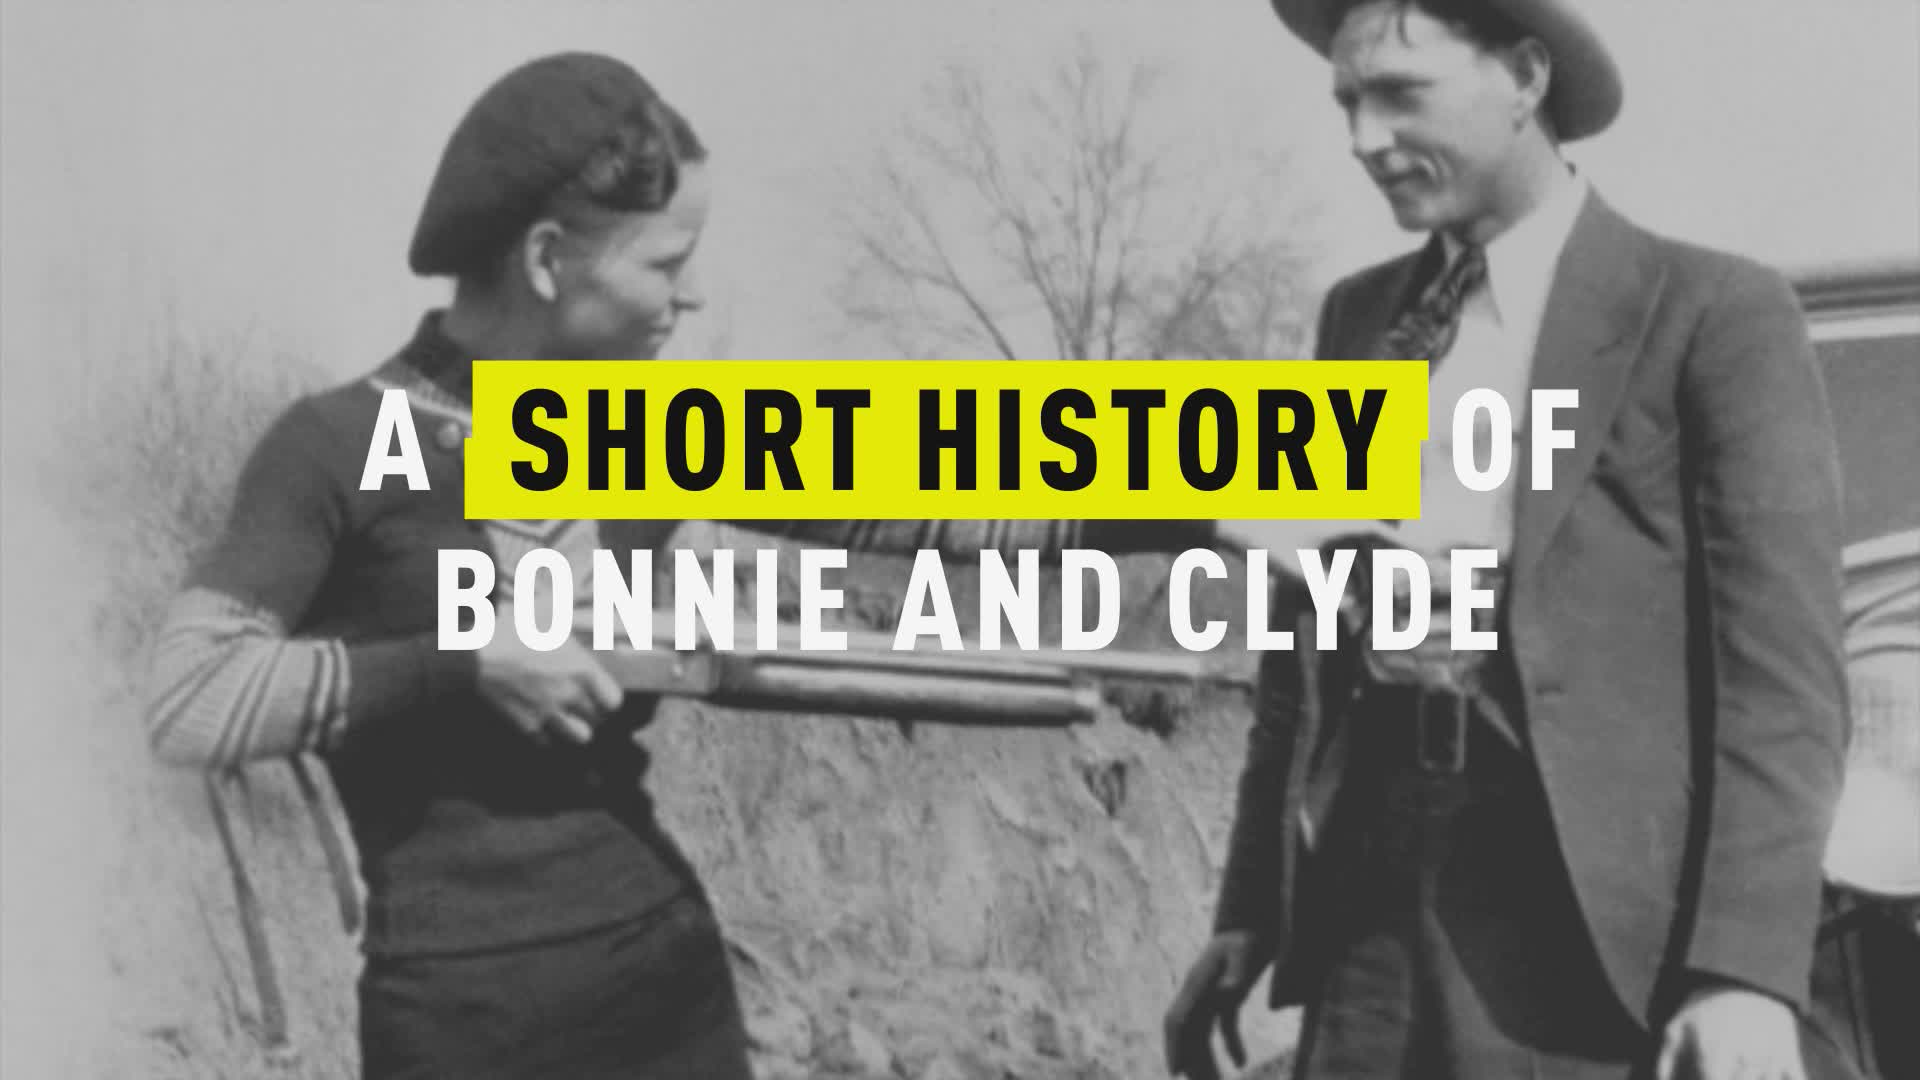 Poem the analysis of bonnie and clyde story 